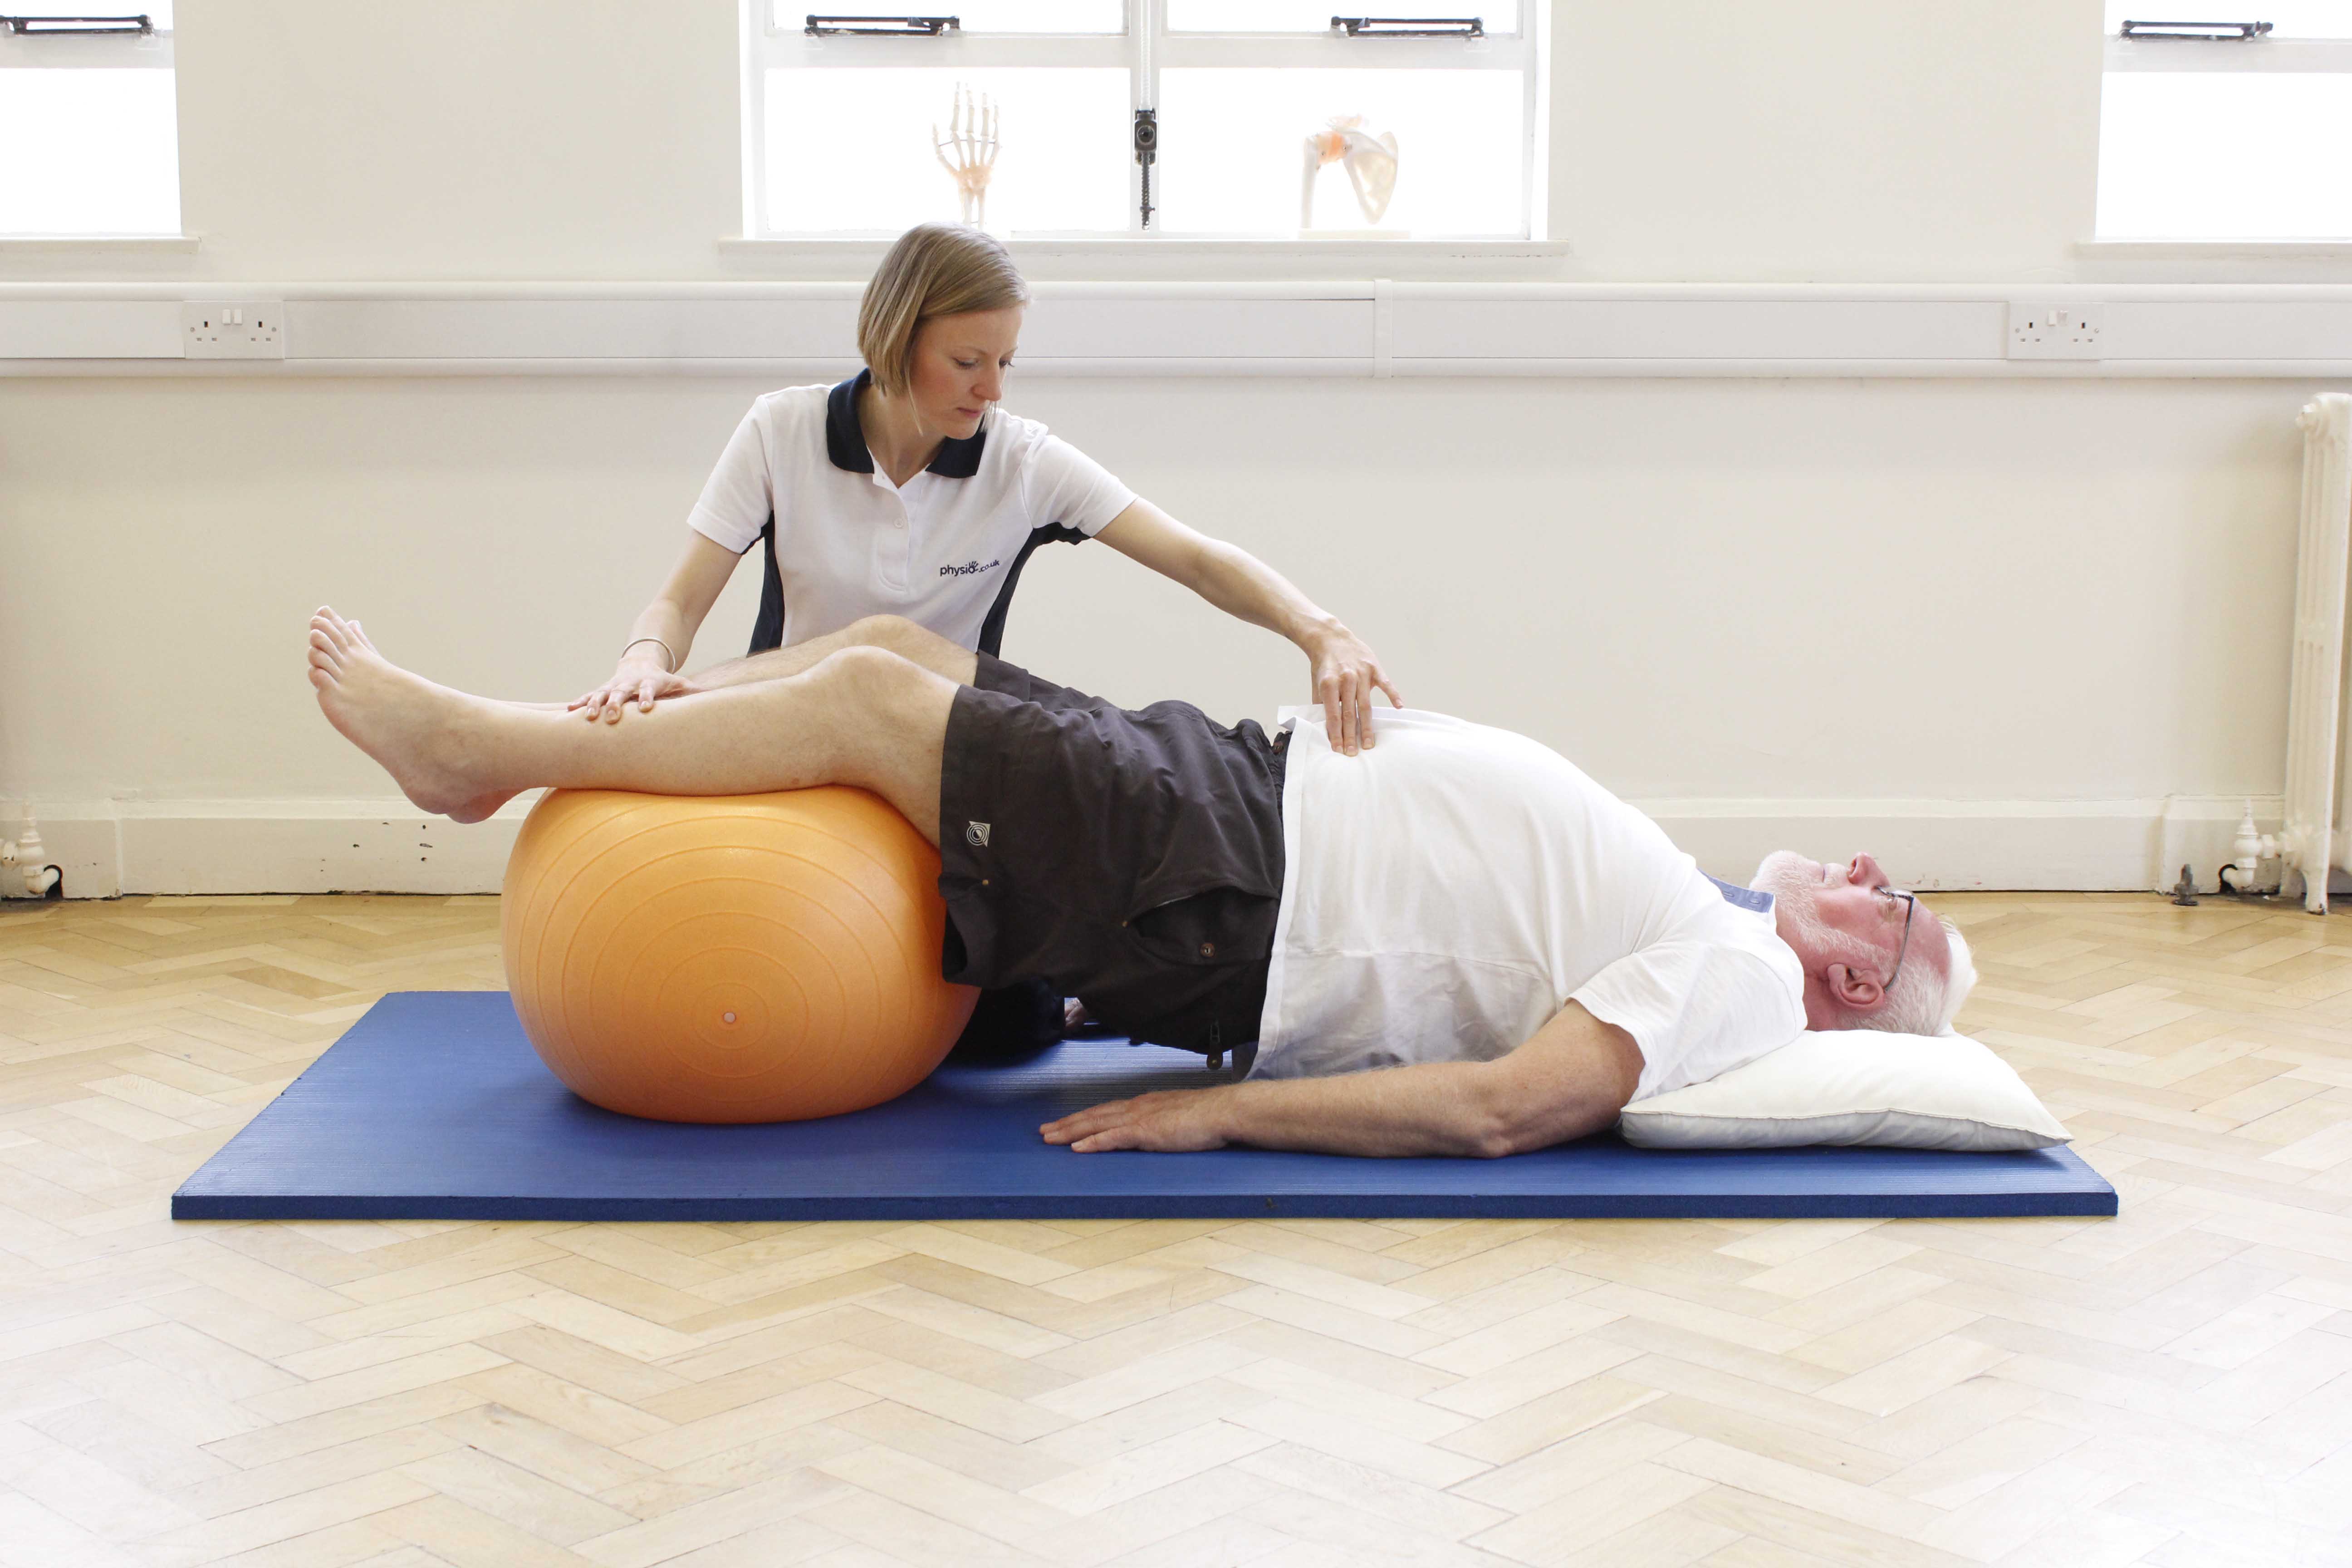 Improving abdominal and pelvic muscle control with assistance from a specialist physiotherapist